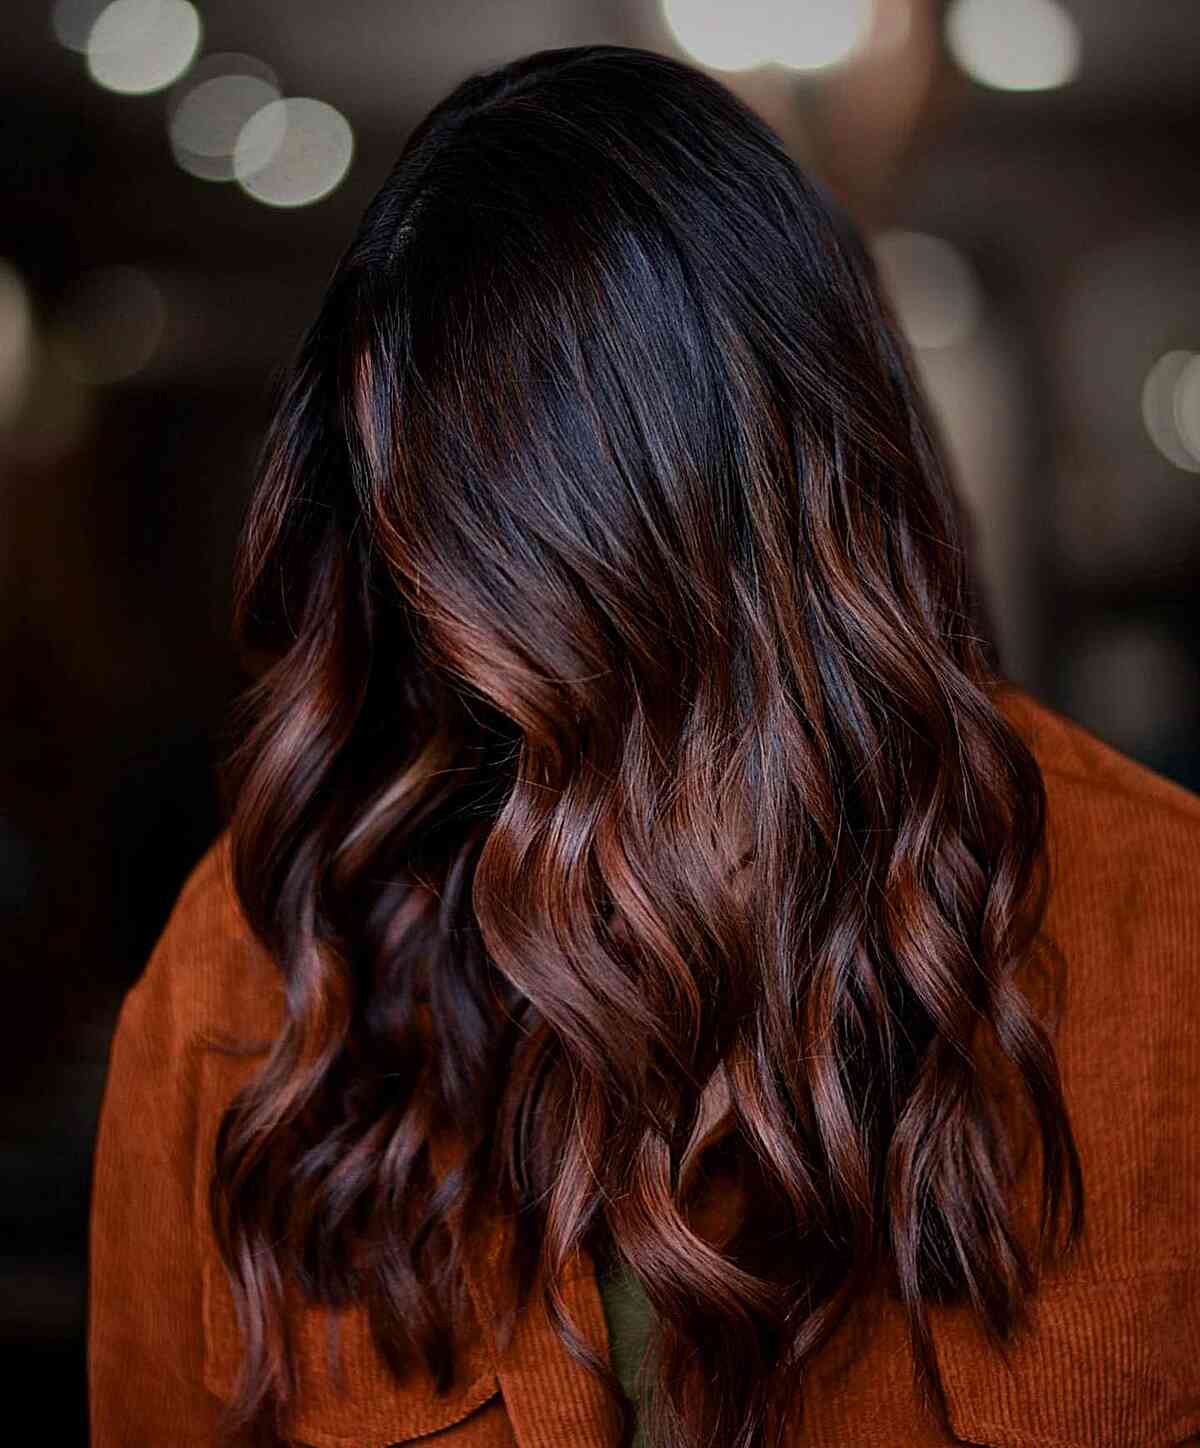 Autumn-winter hairstyle trends 2021